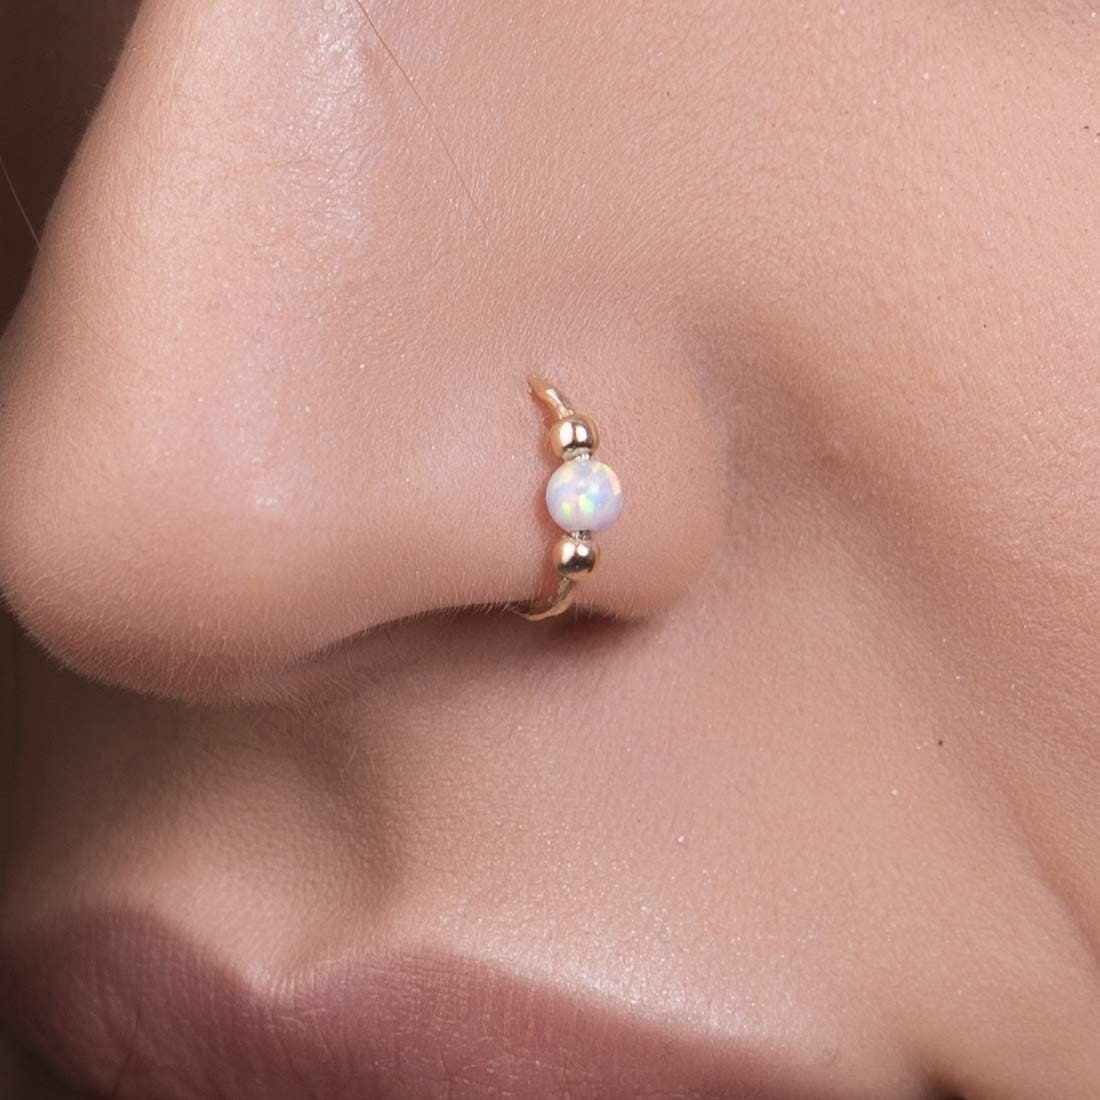 Phone quality] New nostril piercing, rose gold + opal! Pierced at Maria  Tash in NYC. : r/piercing